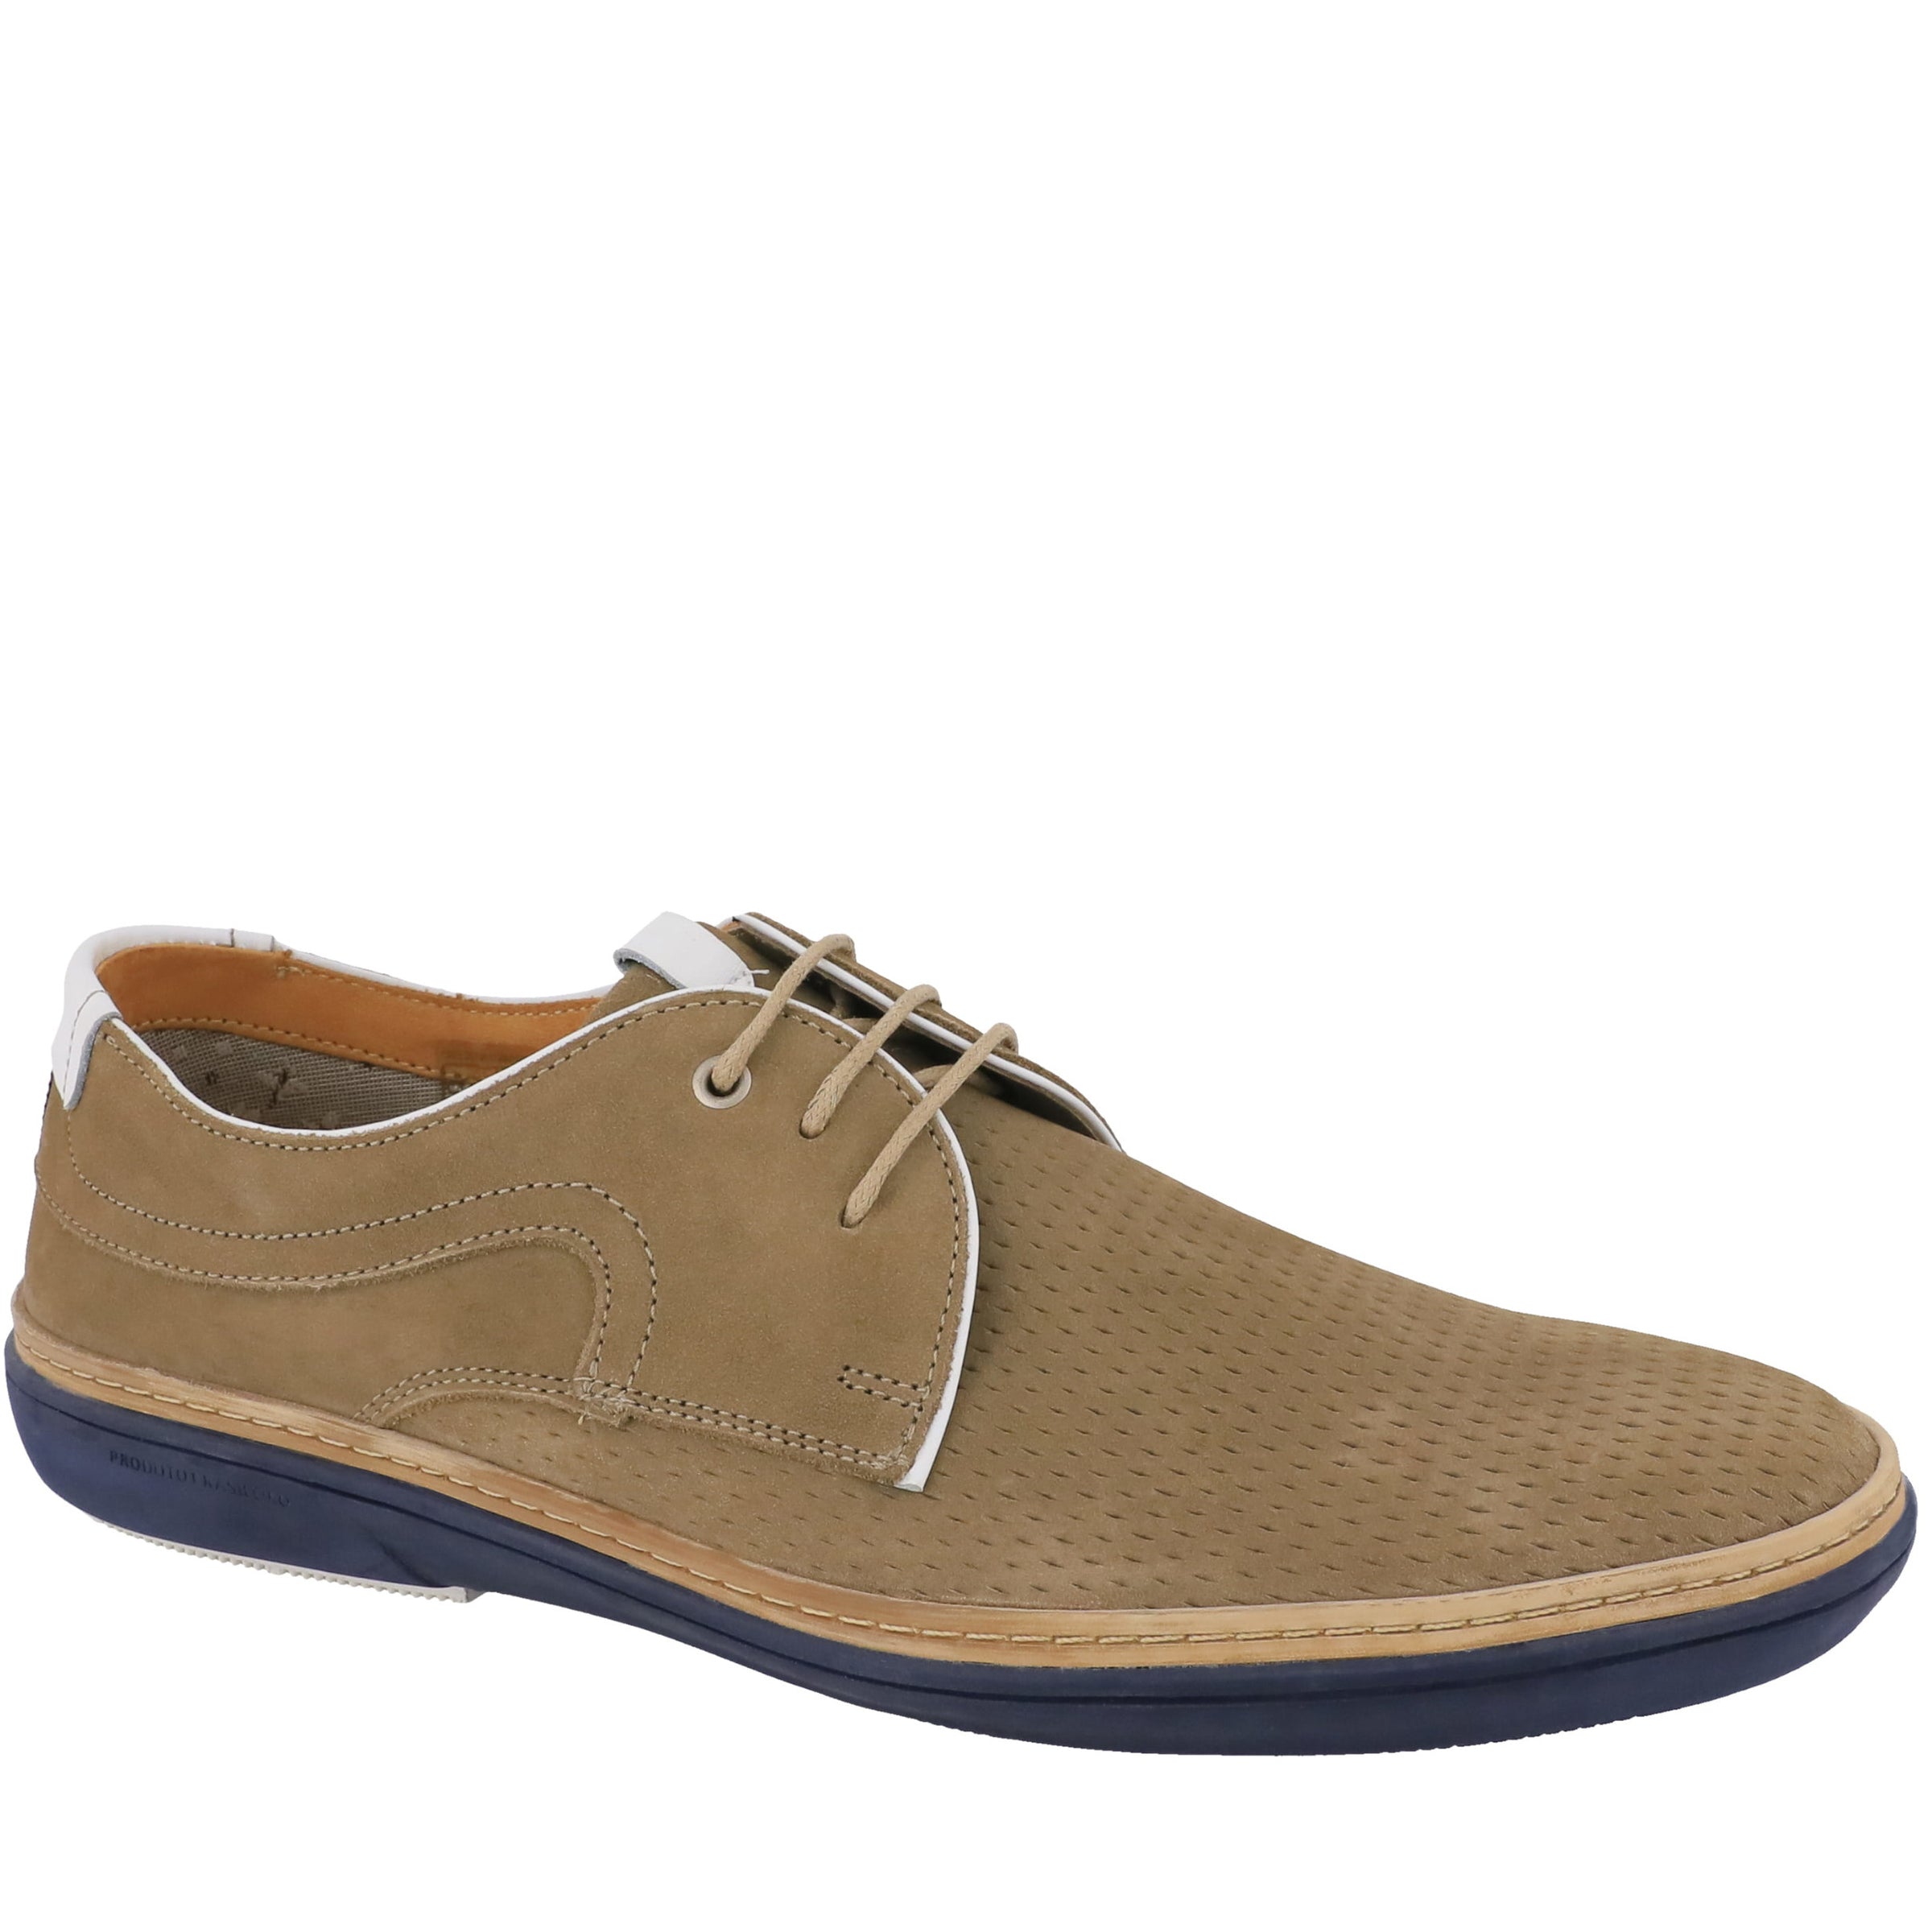 lancer brown casual shoes